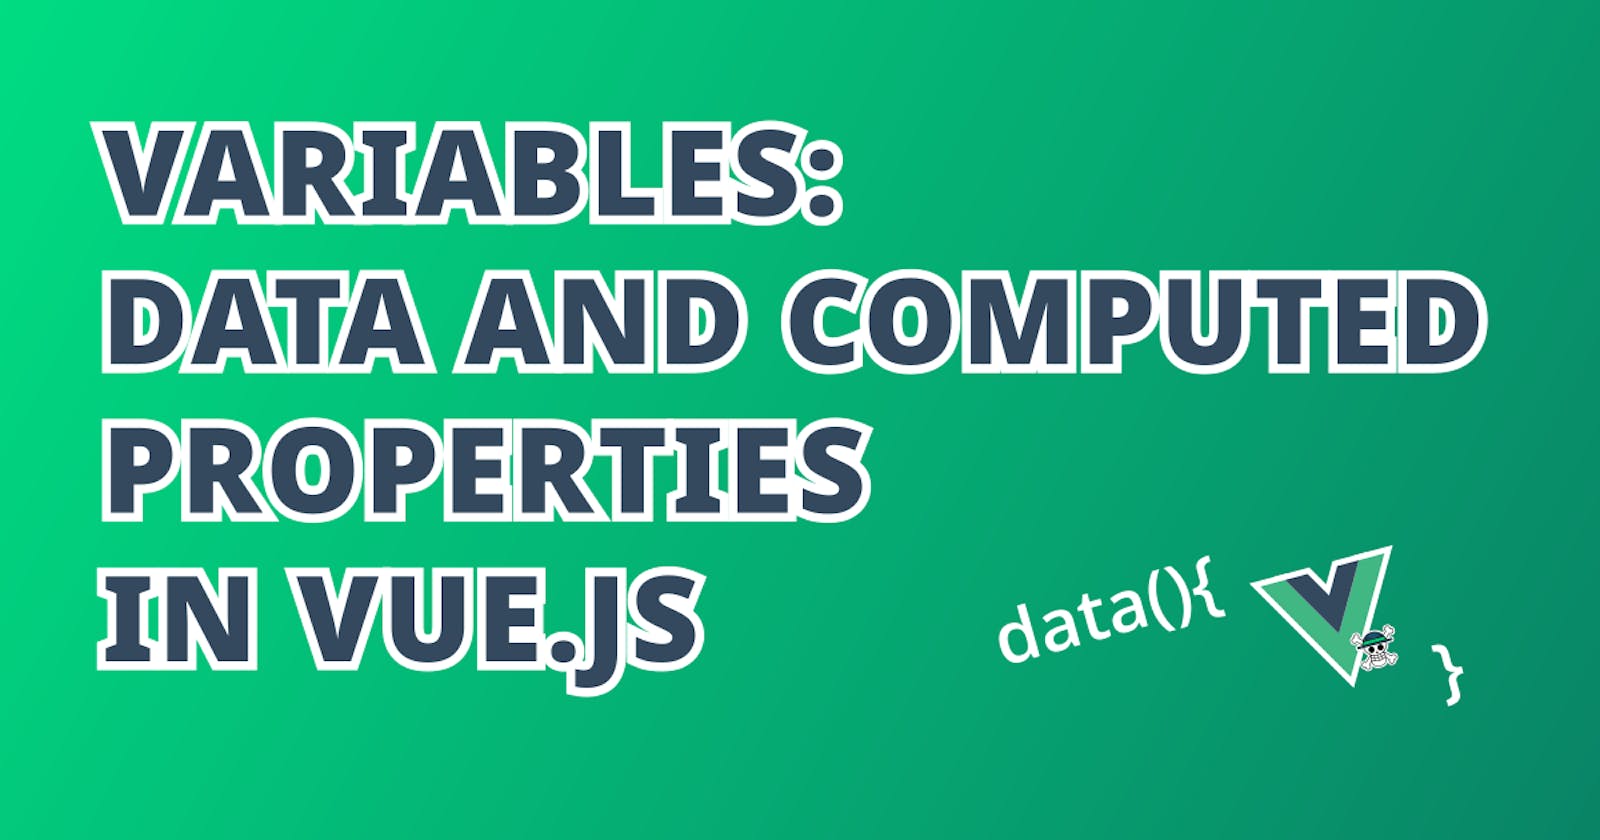 Variables: Data and Computed Properties in Vue.js